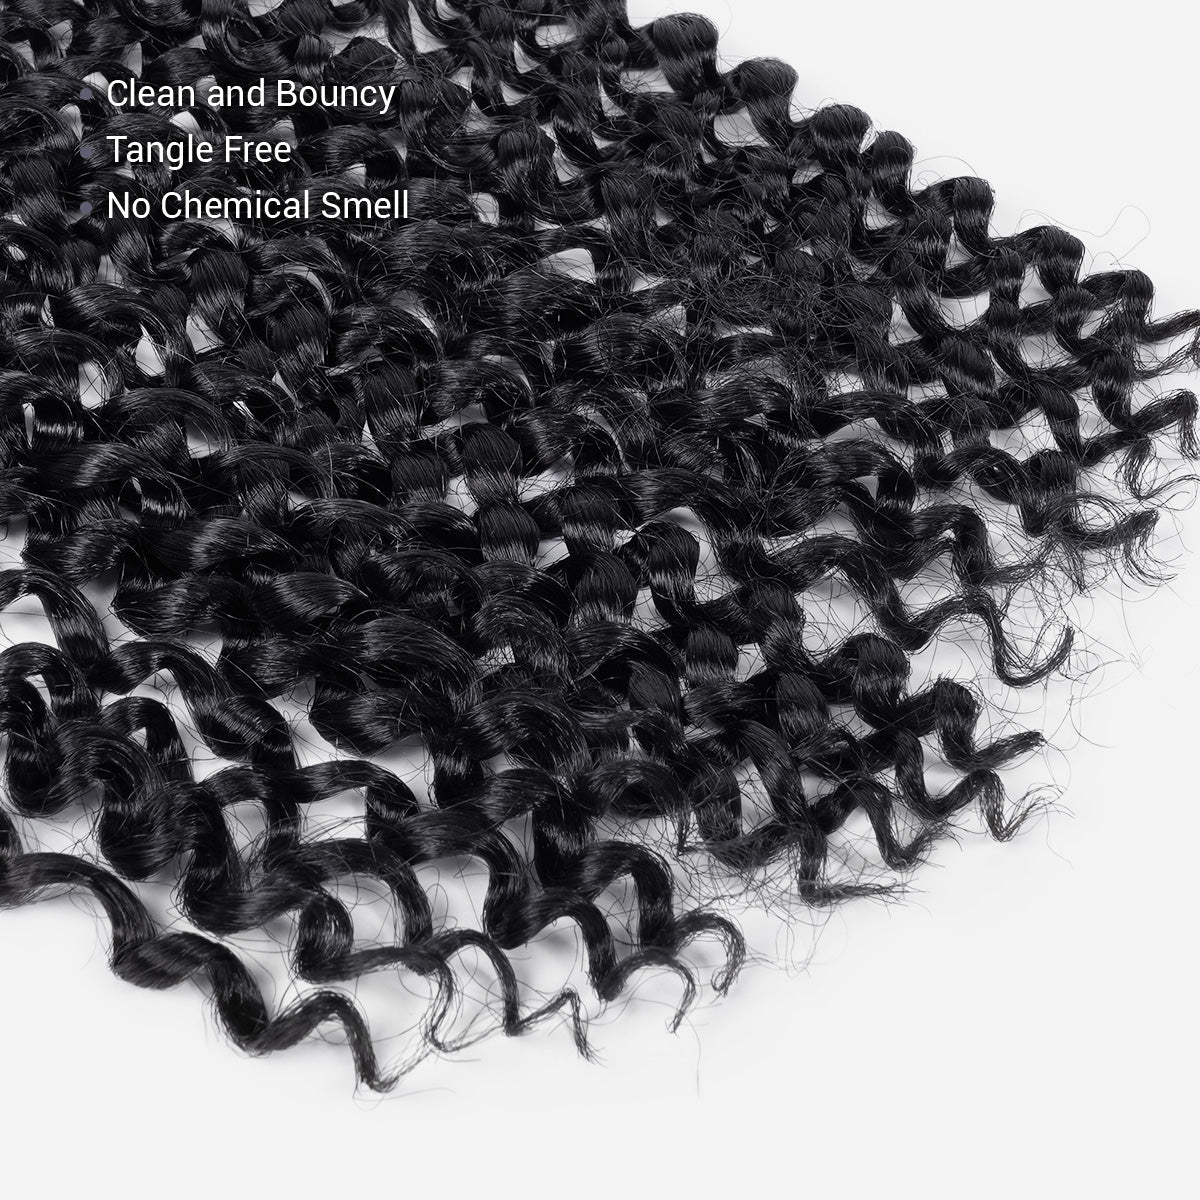 Authentic Synthetic Hair Crochet Braids 6X Value Pack Water Wave 22"